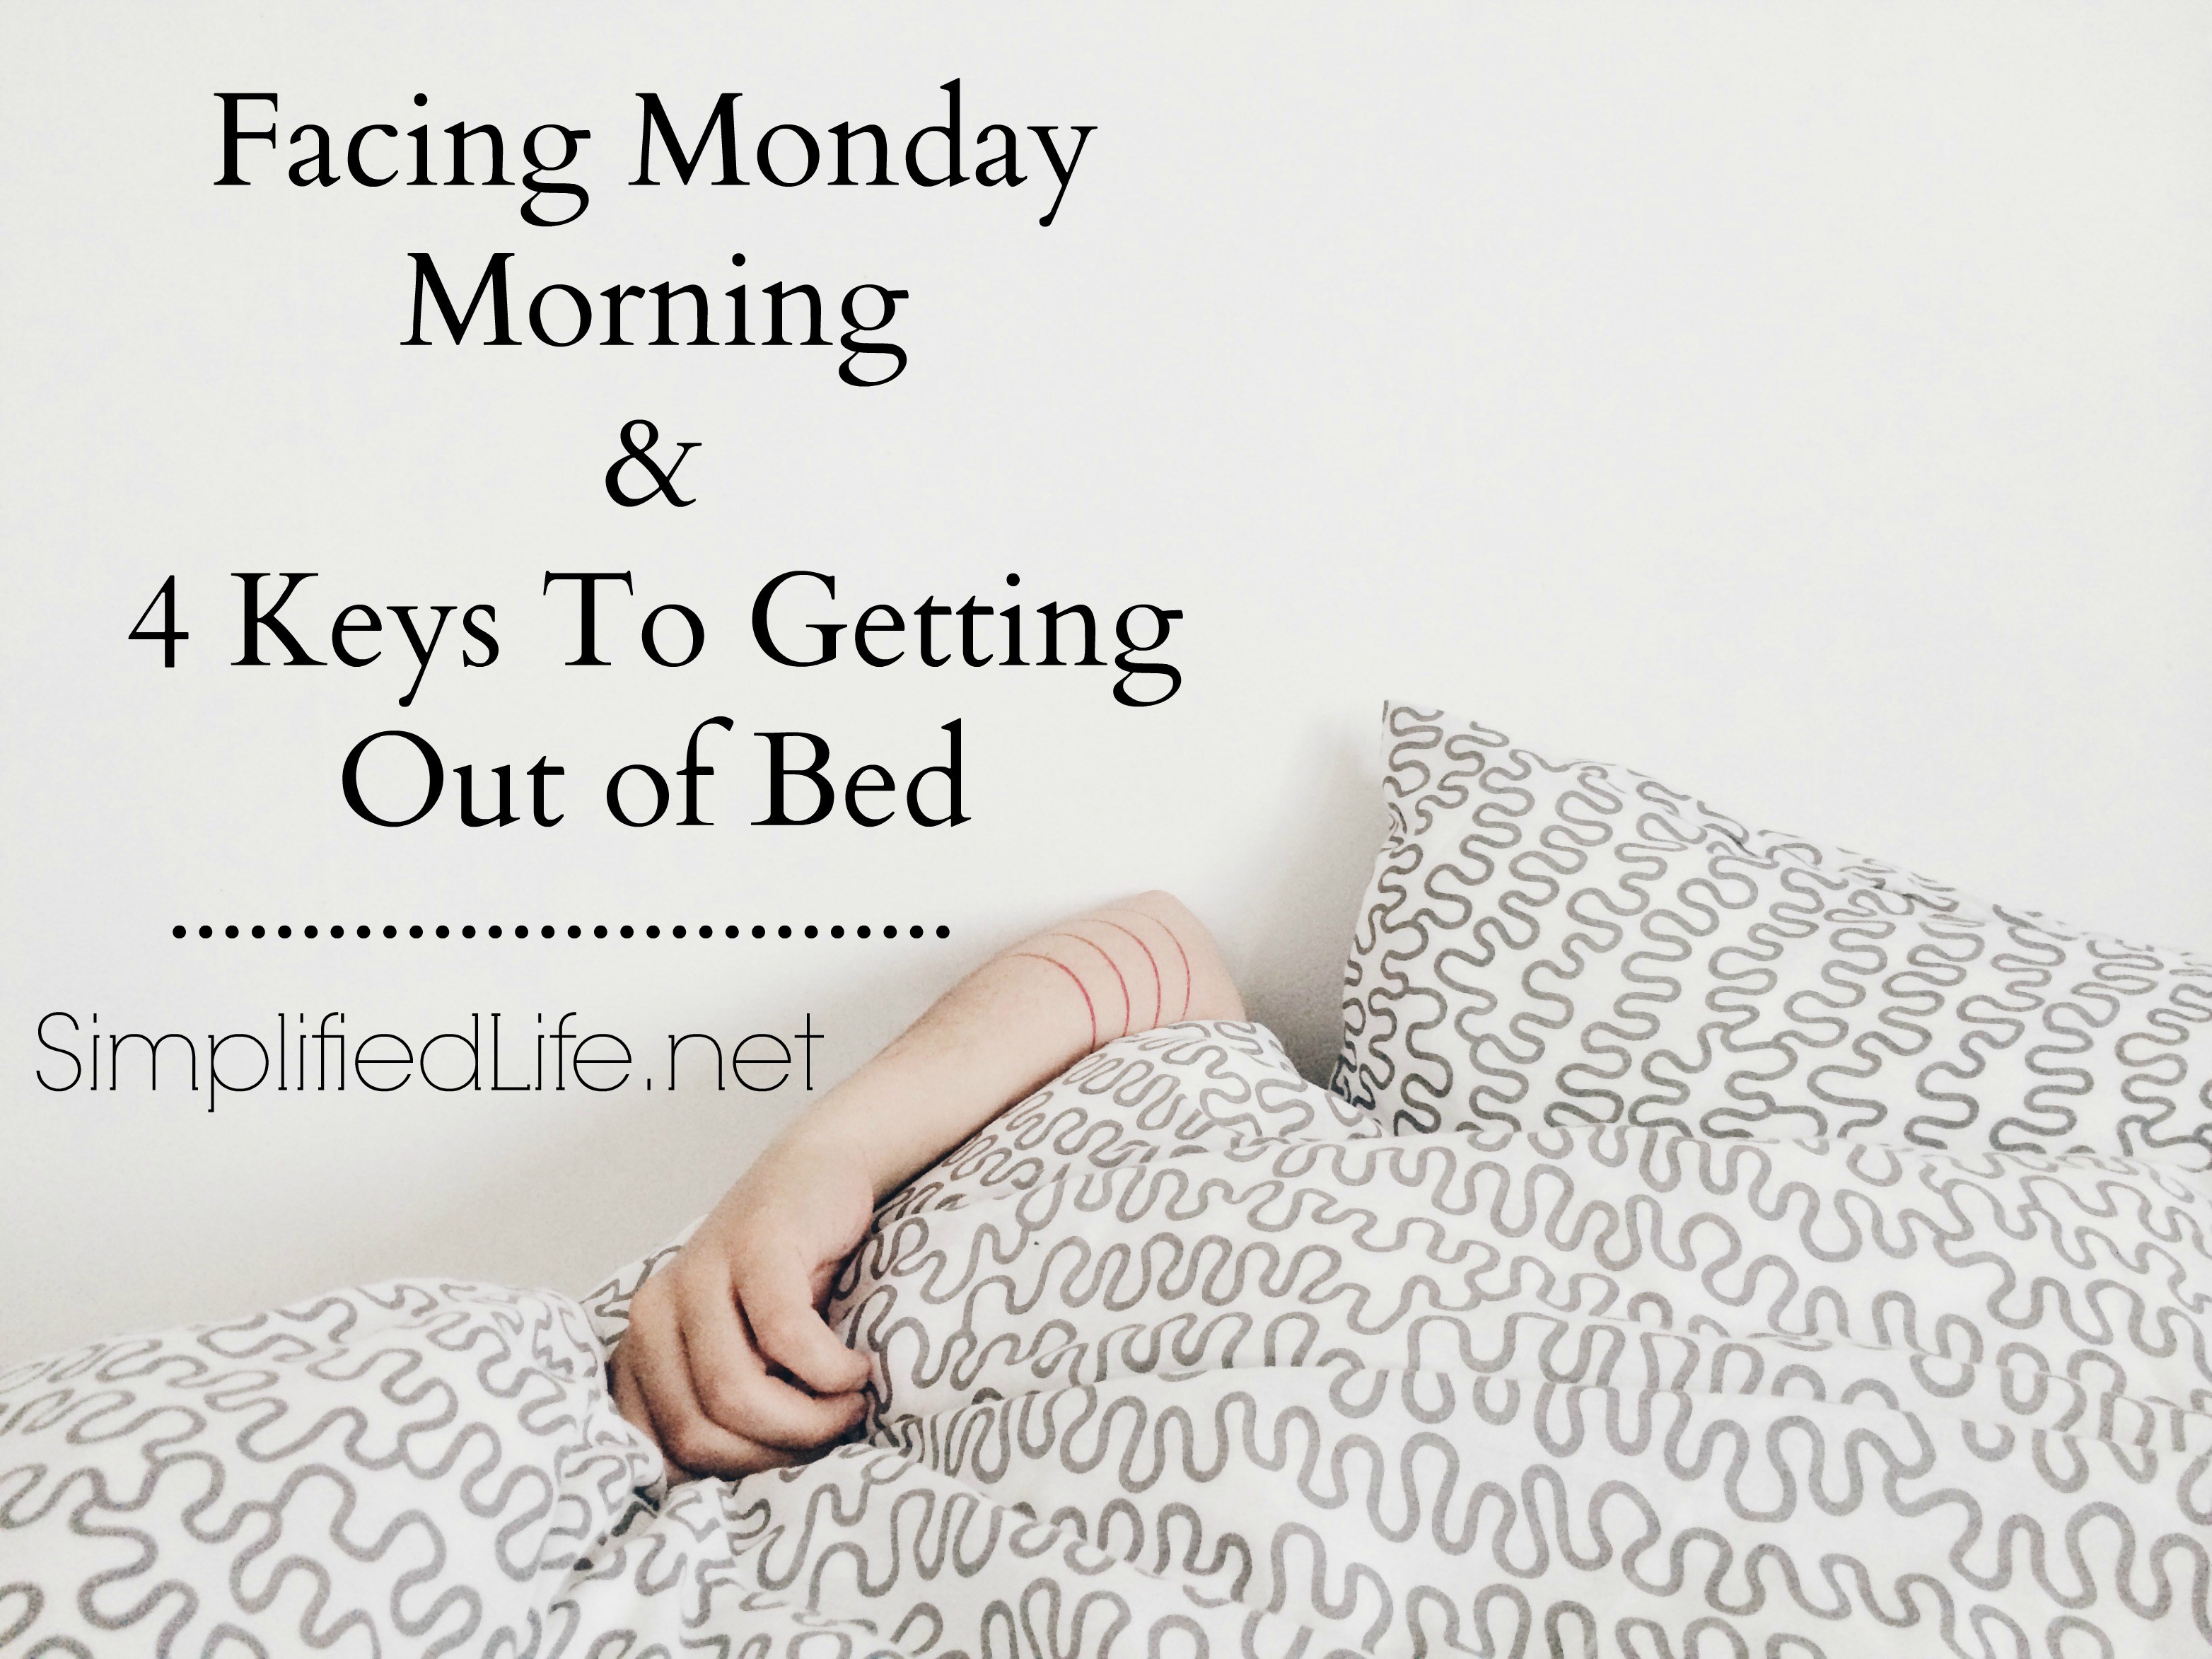 Monday Mornings & 4 Keys To Getting Out Of Bed- Victoria Mininger